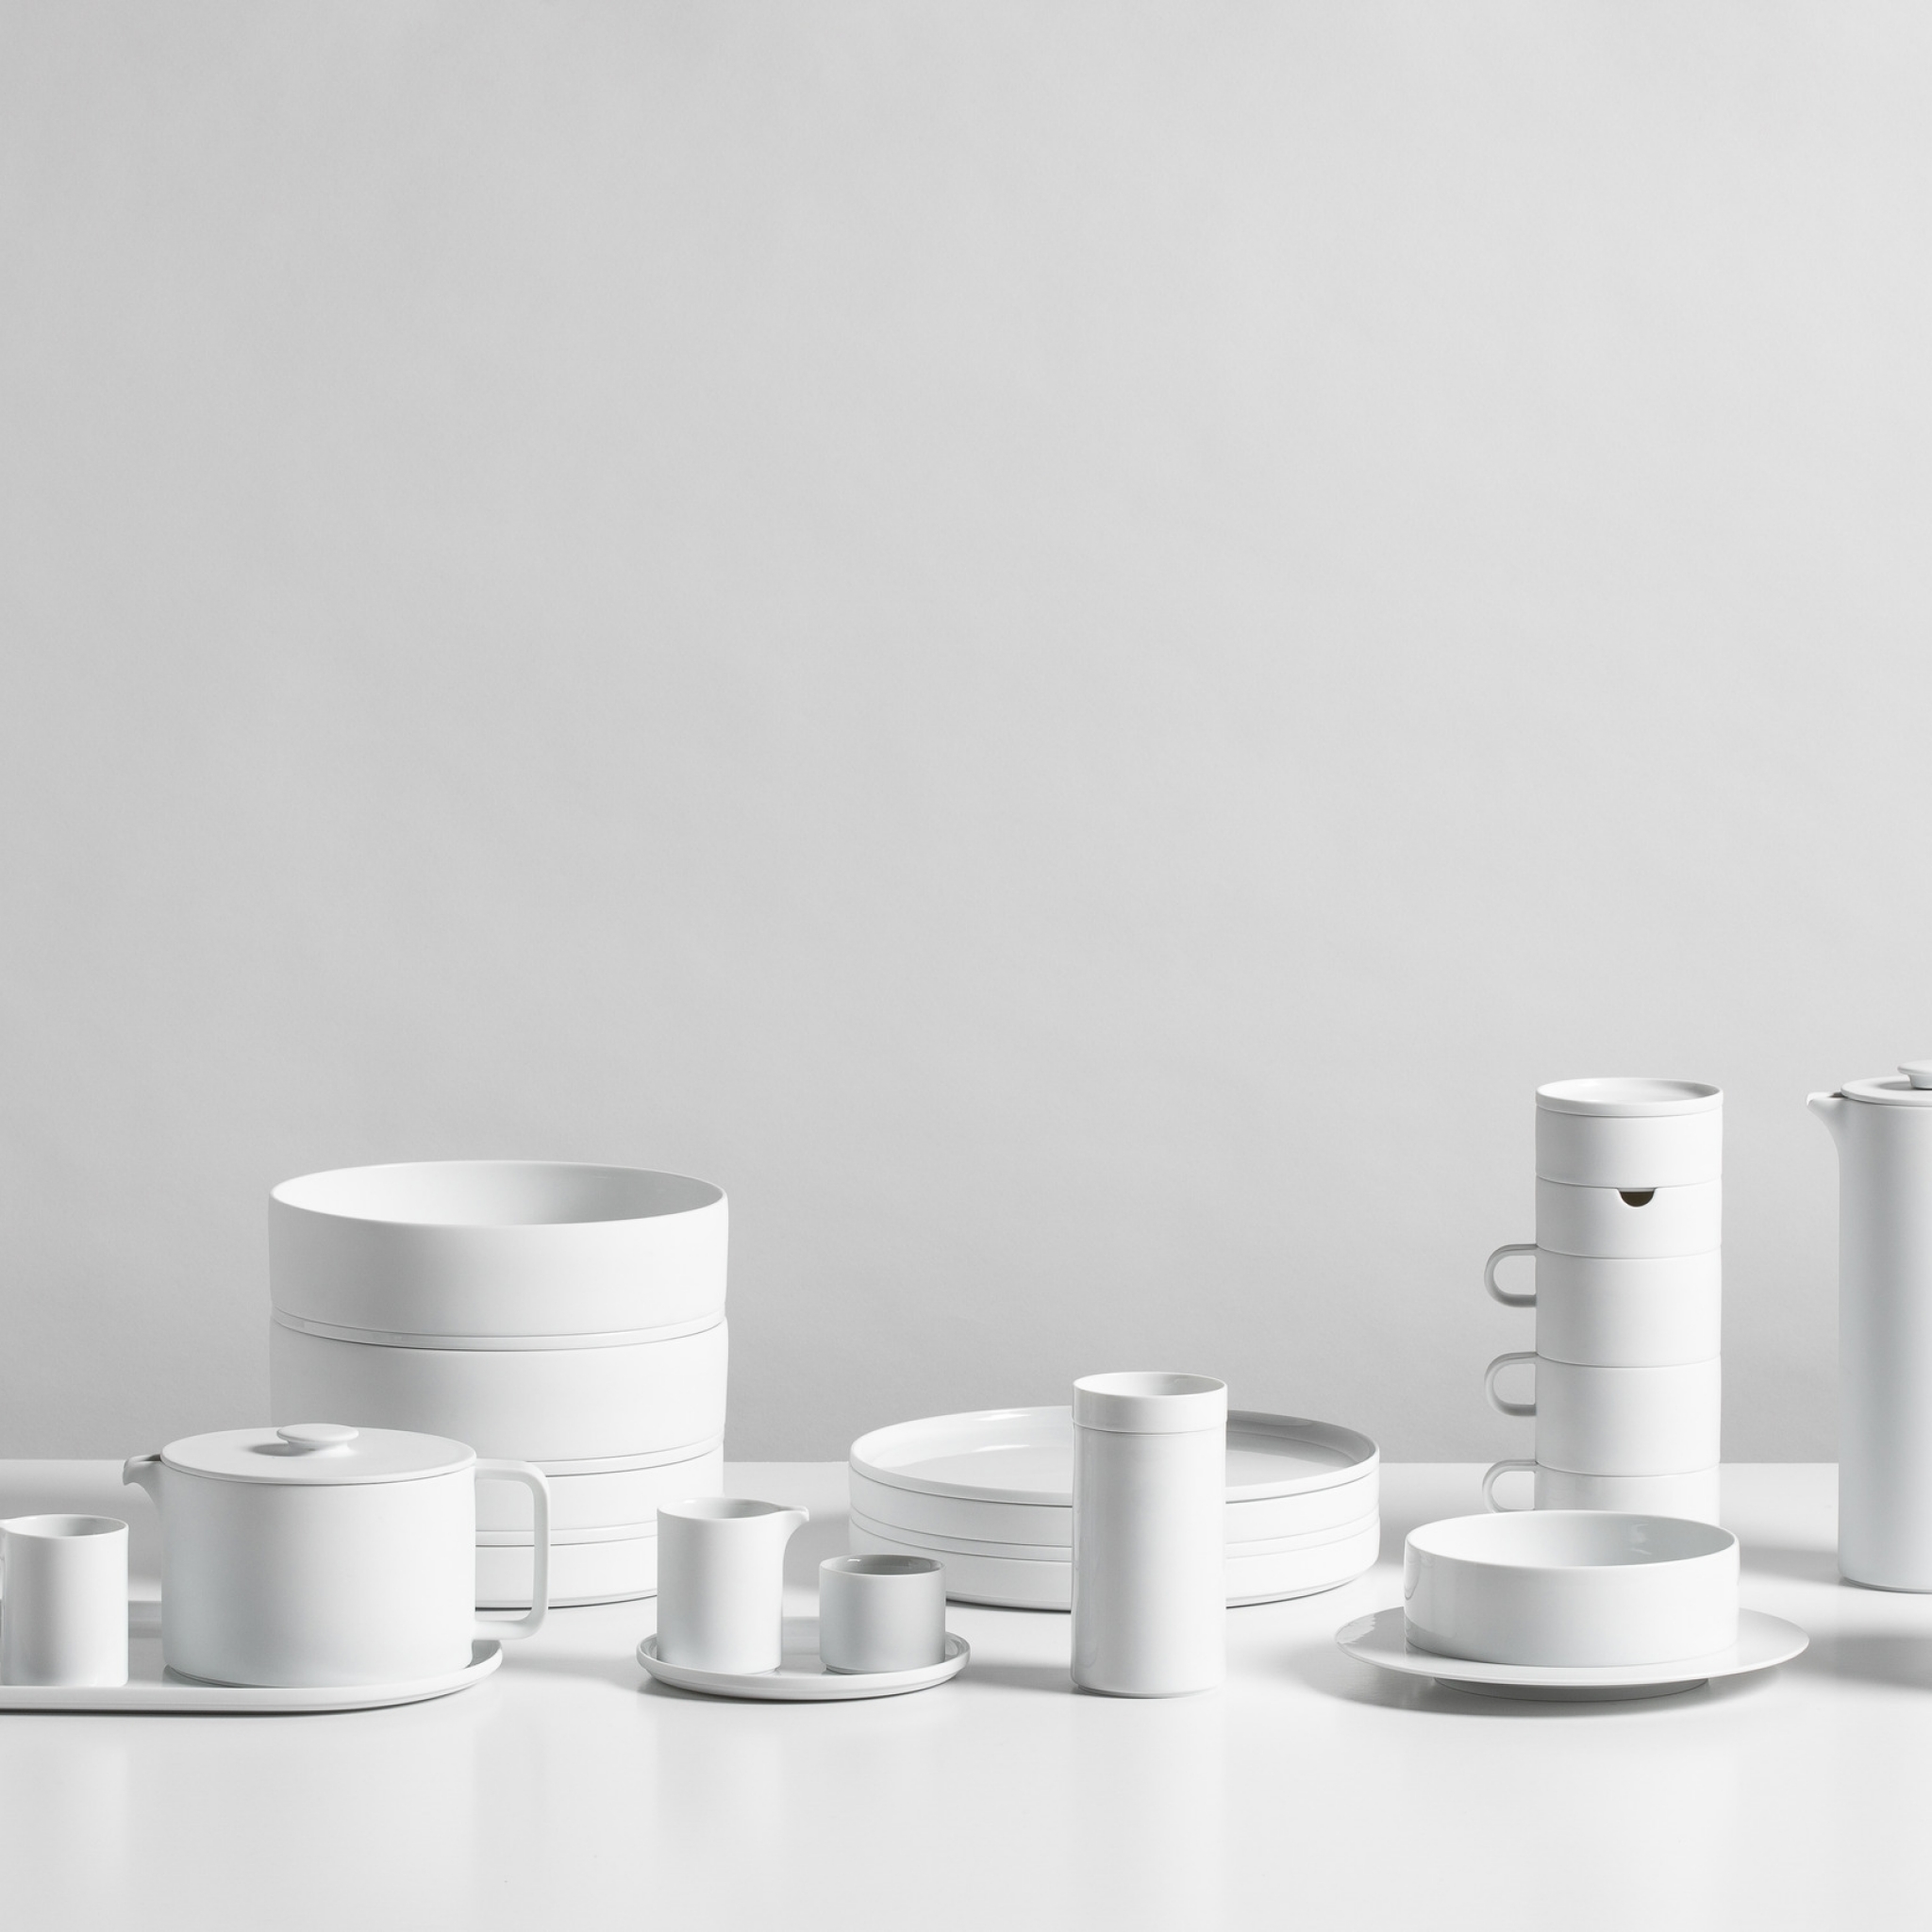 Datum Tableware by Foster + Partners